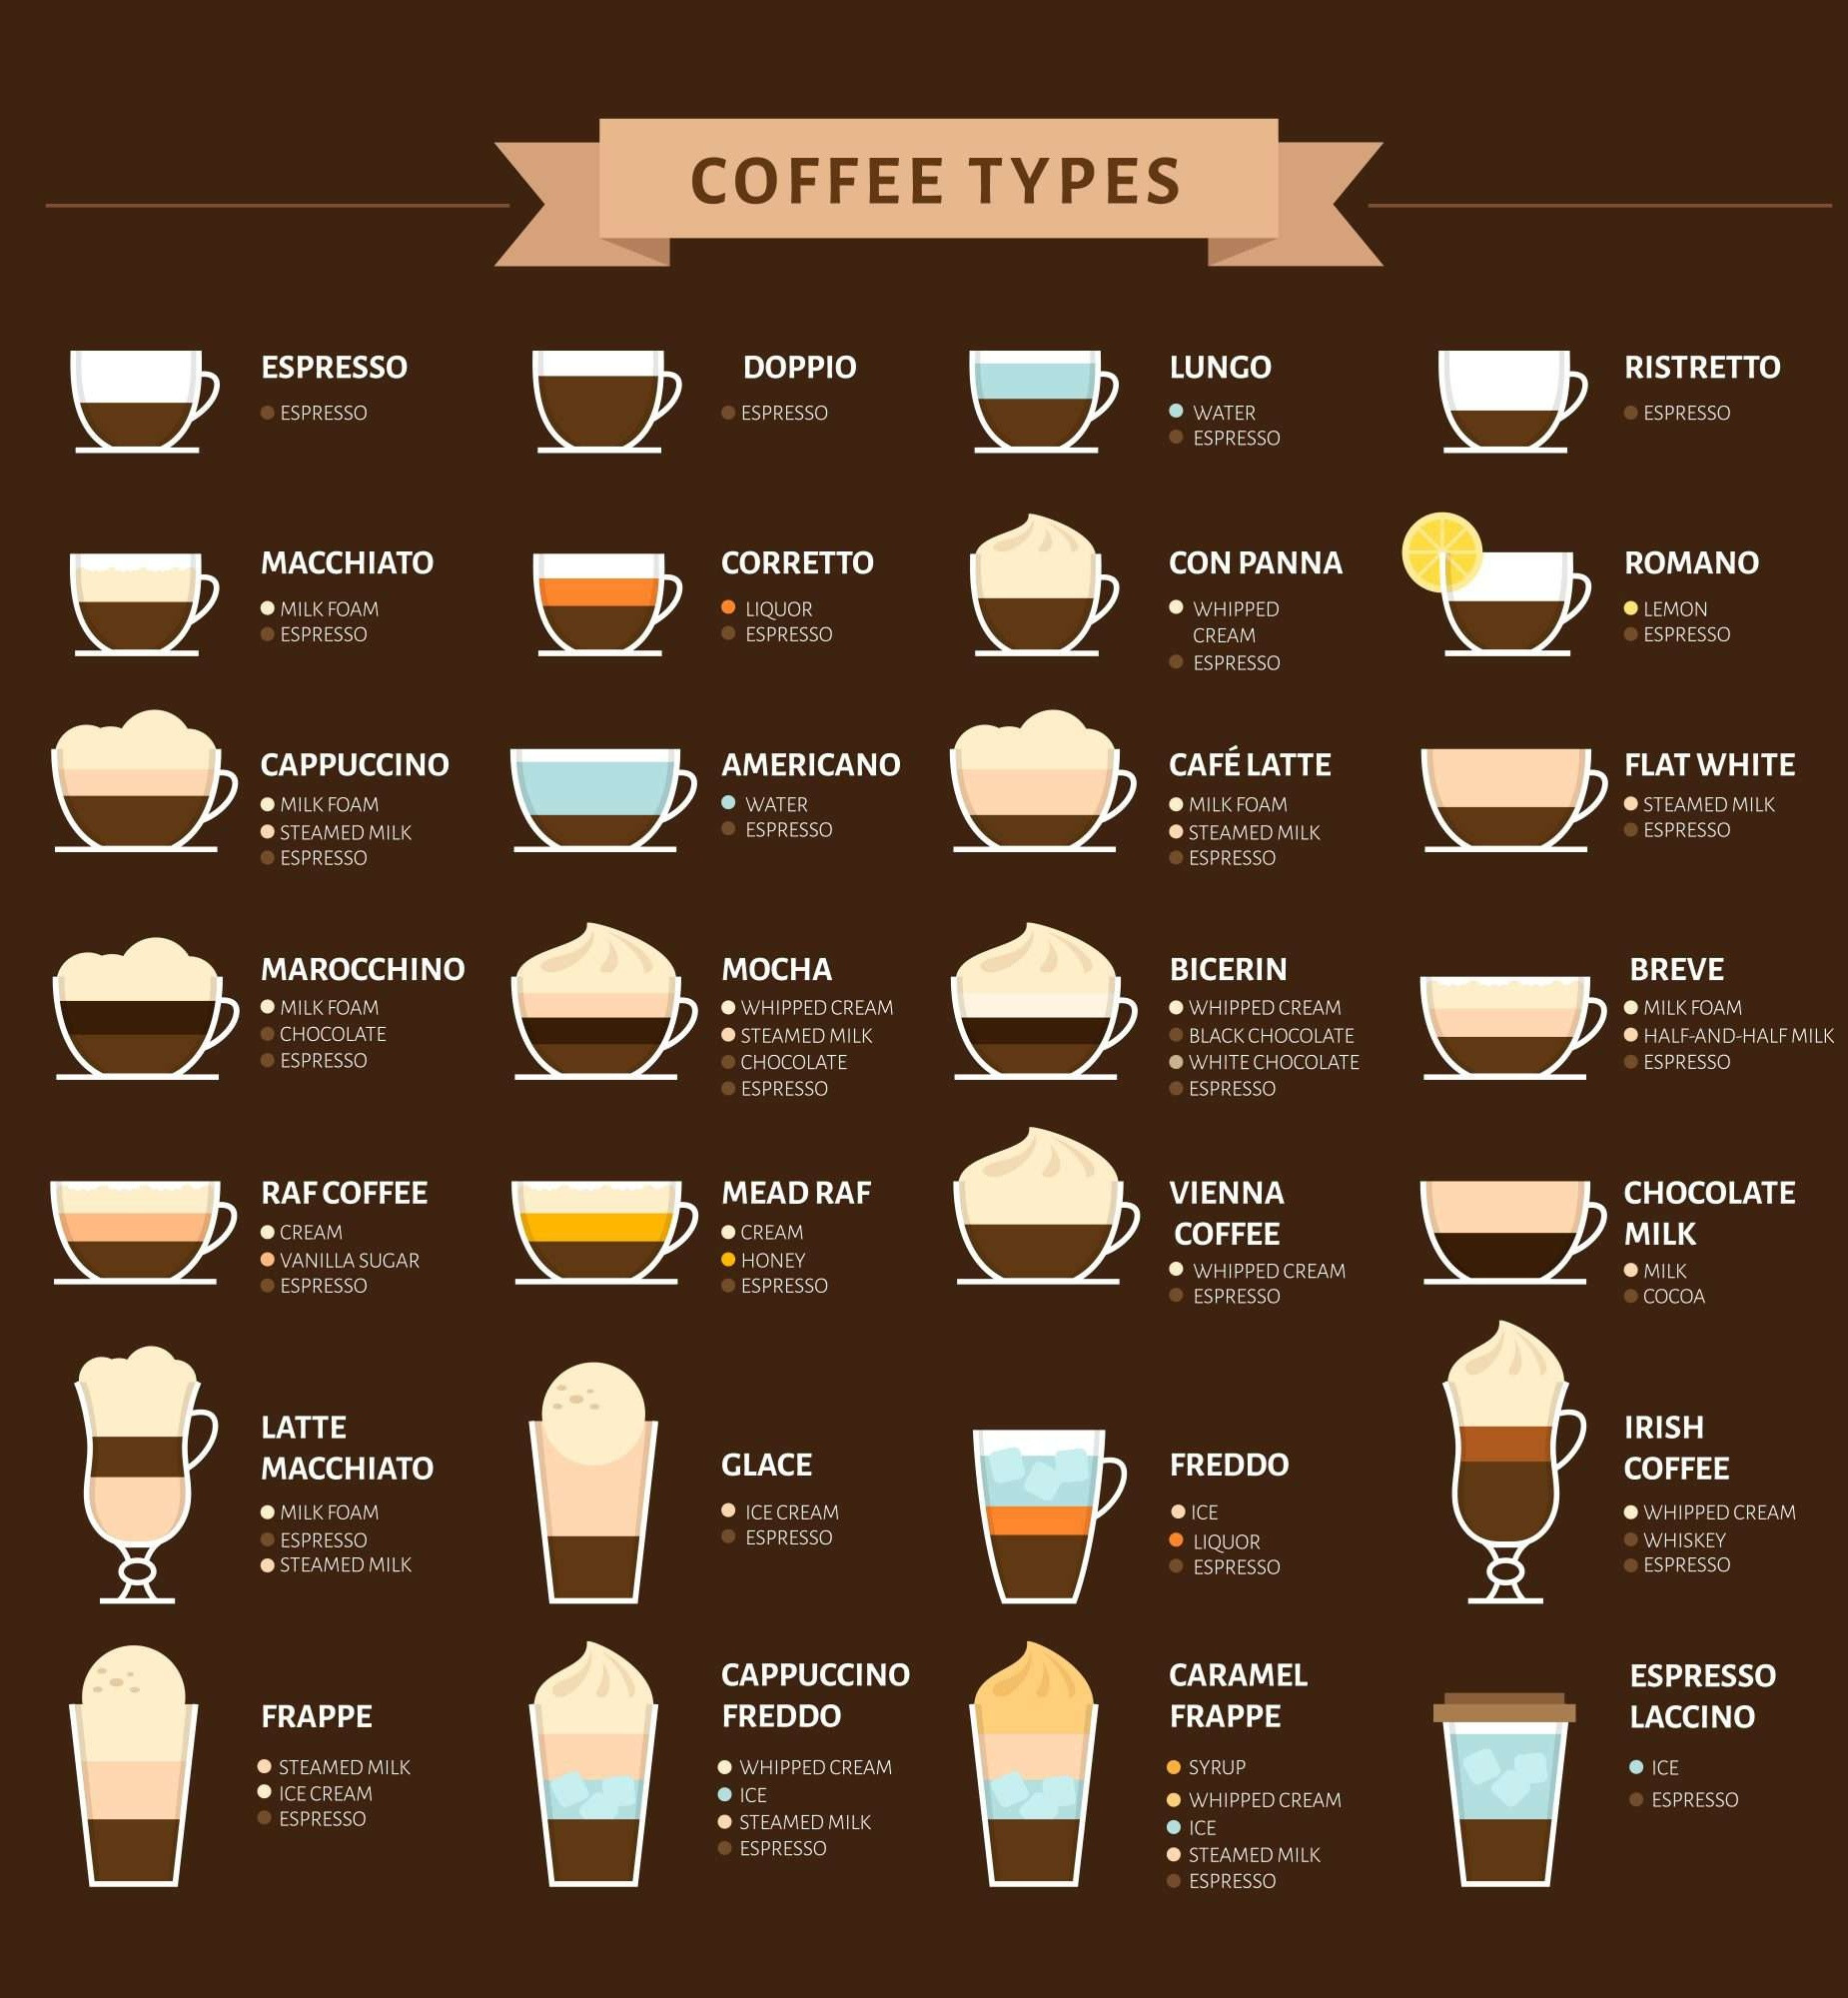 Types Of Coffee Drinks
 28 of the most mon types of coffee drinks and their